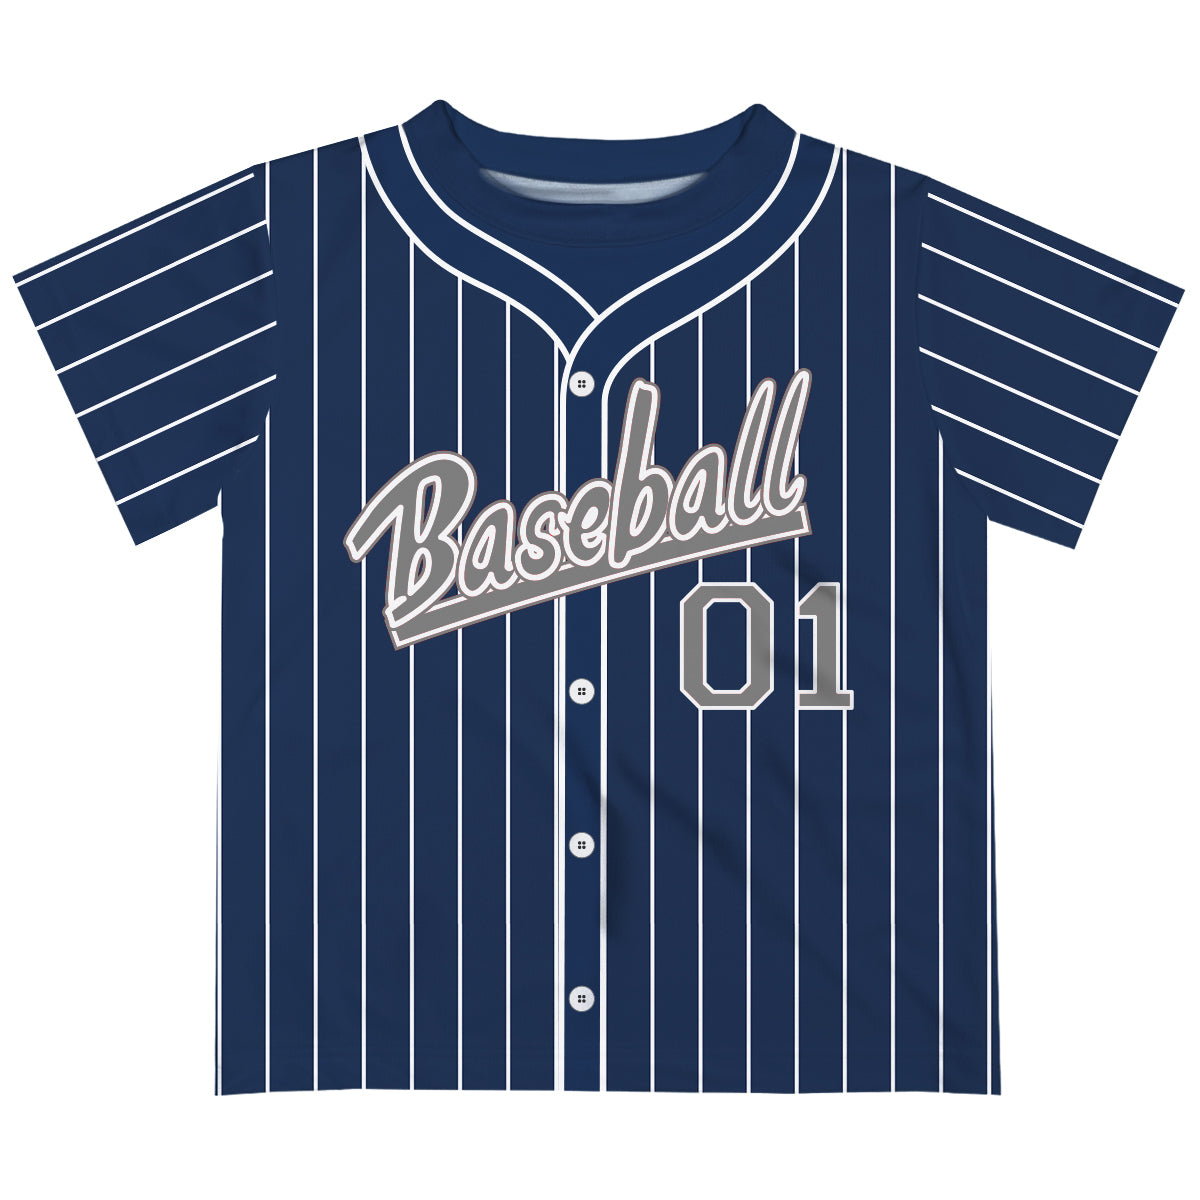 Baseball Personalized Name and Number Navy and White Stripes Short Sleeve Tee Shirt